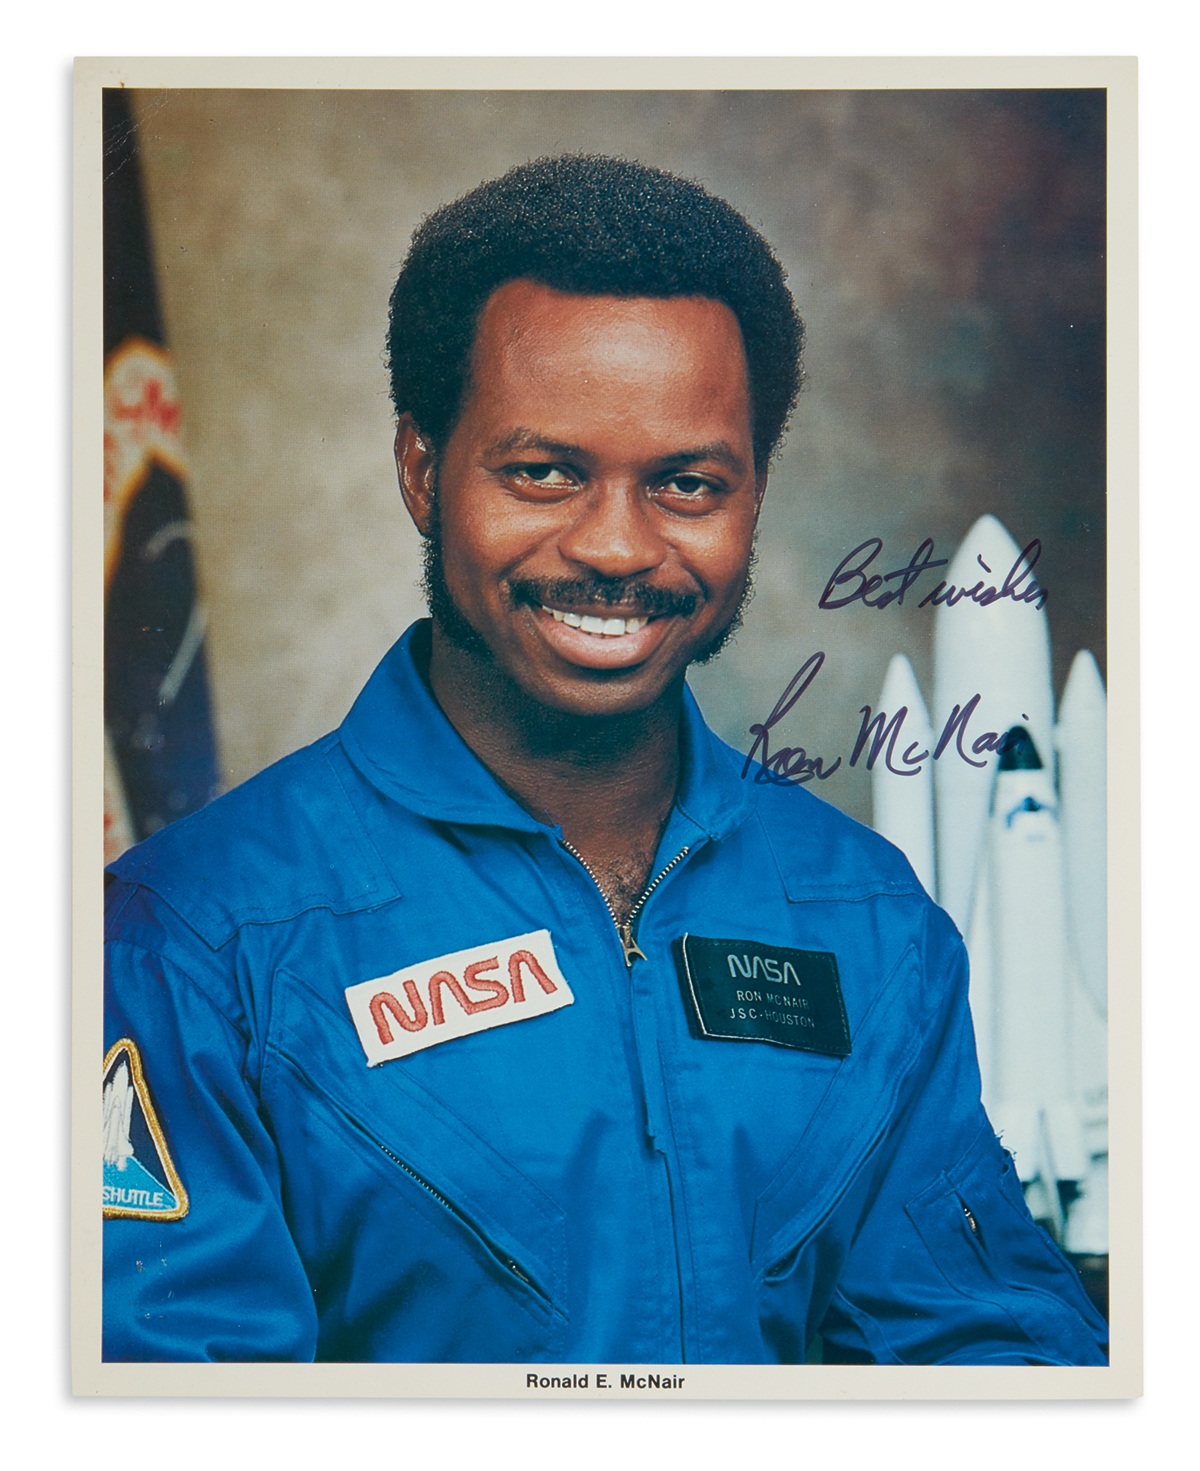 CASUALTY OF CHALLENGER DISASTER (ASTRONAUTS.) RONALD E. MCNAIR. Color Photograph Signed and Inscribed, Best...